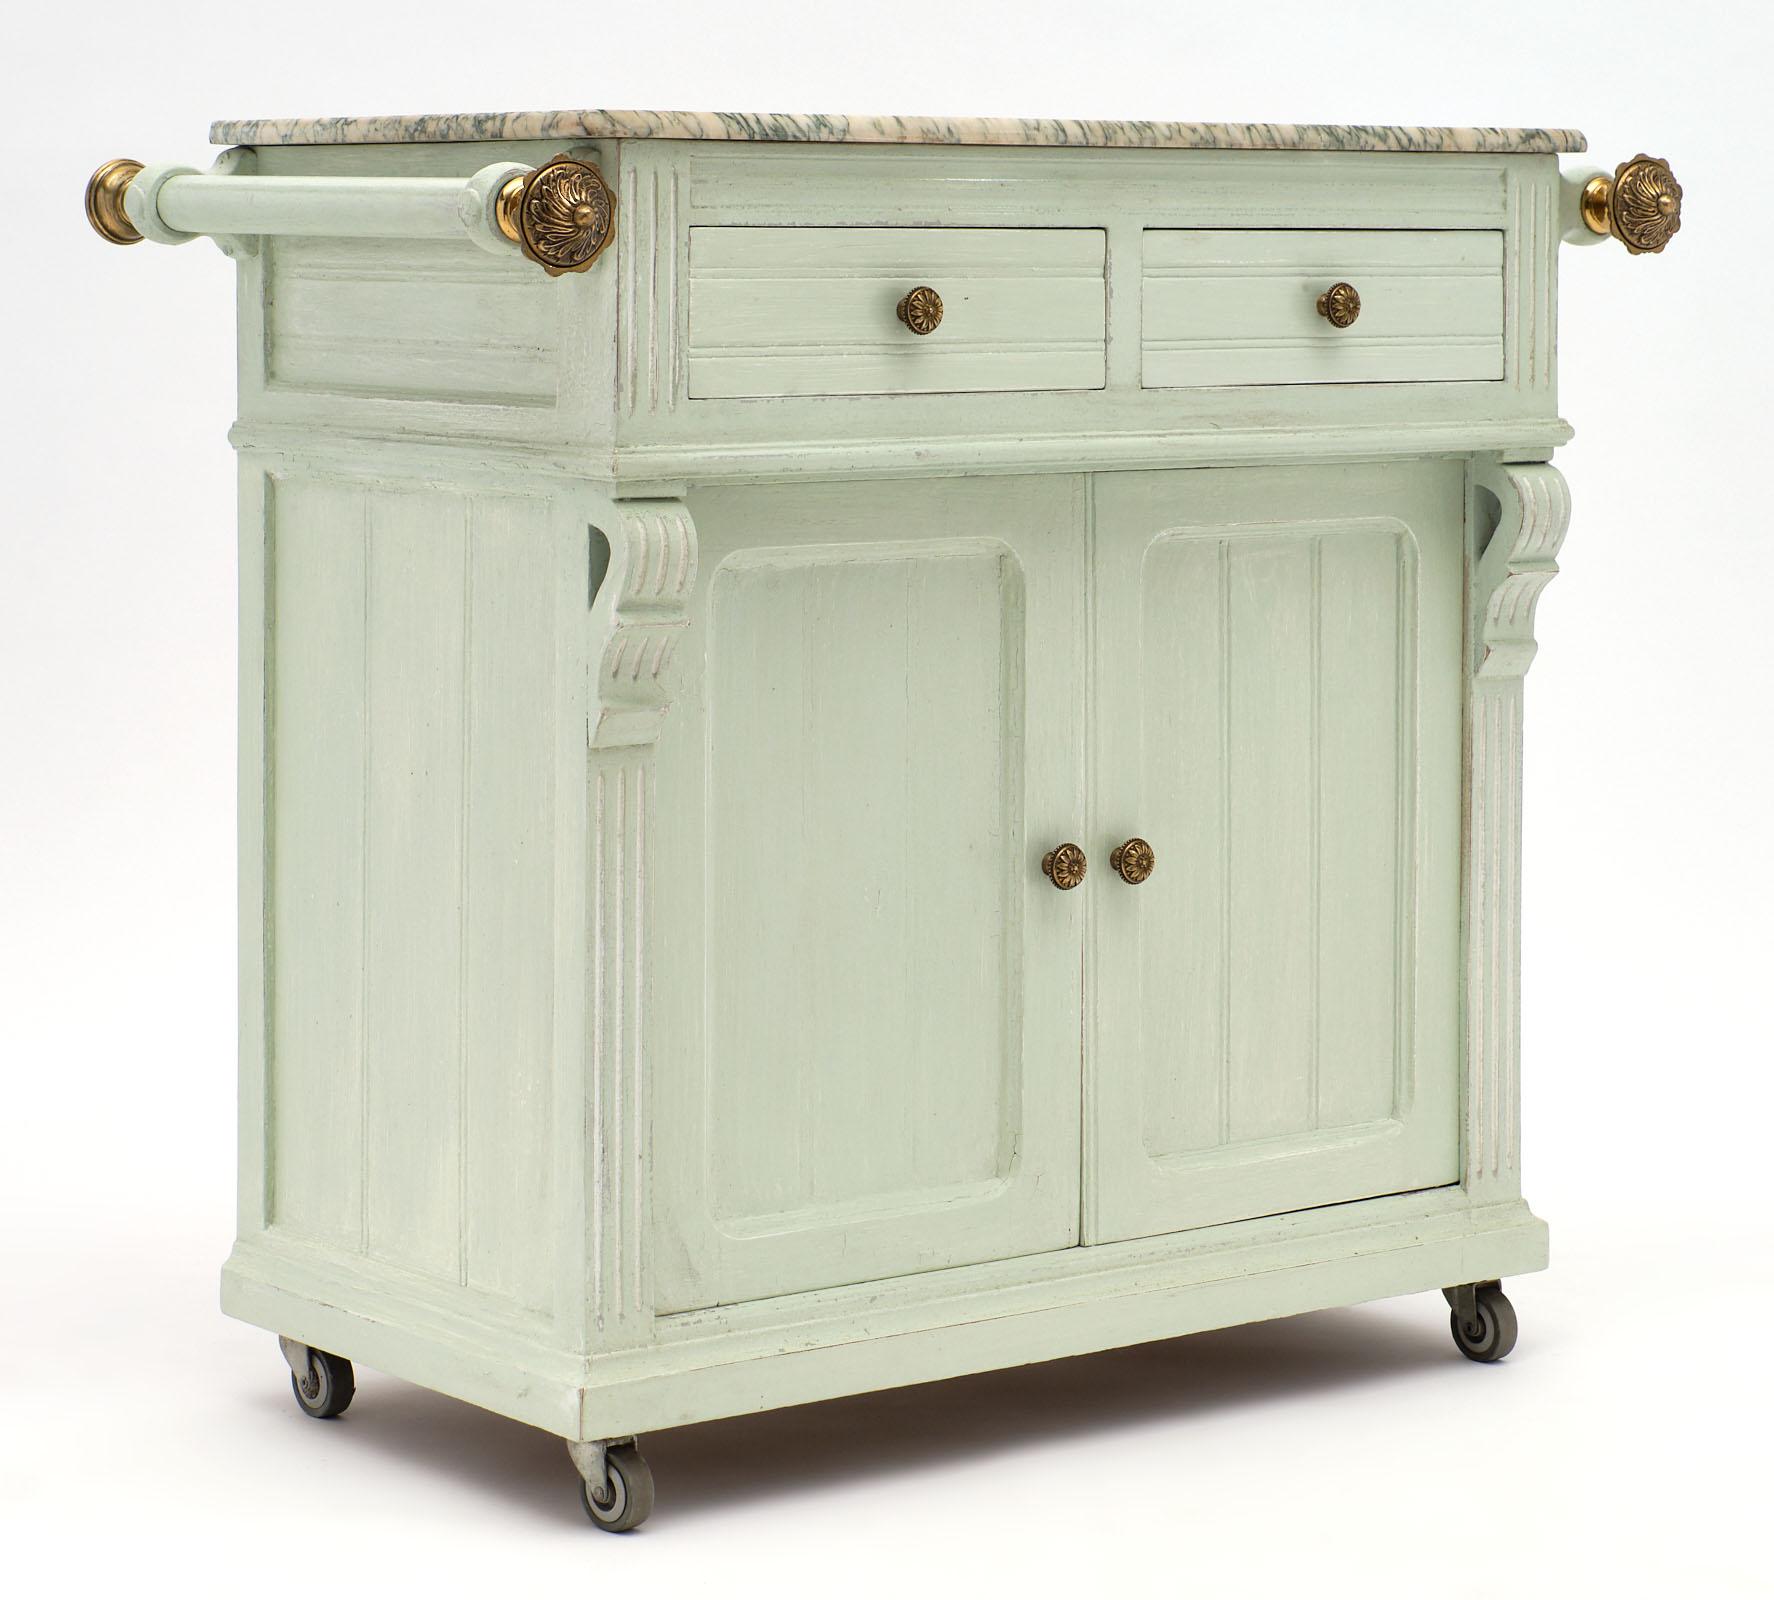 French antique painted pastry cabinet made of fir with the original “aqua verde” marble top and side handle bars featuring finely cast bronze finials. We love the tightness of the piece and the storage inside. Two drawers give extra storage and the